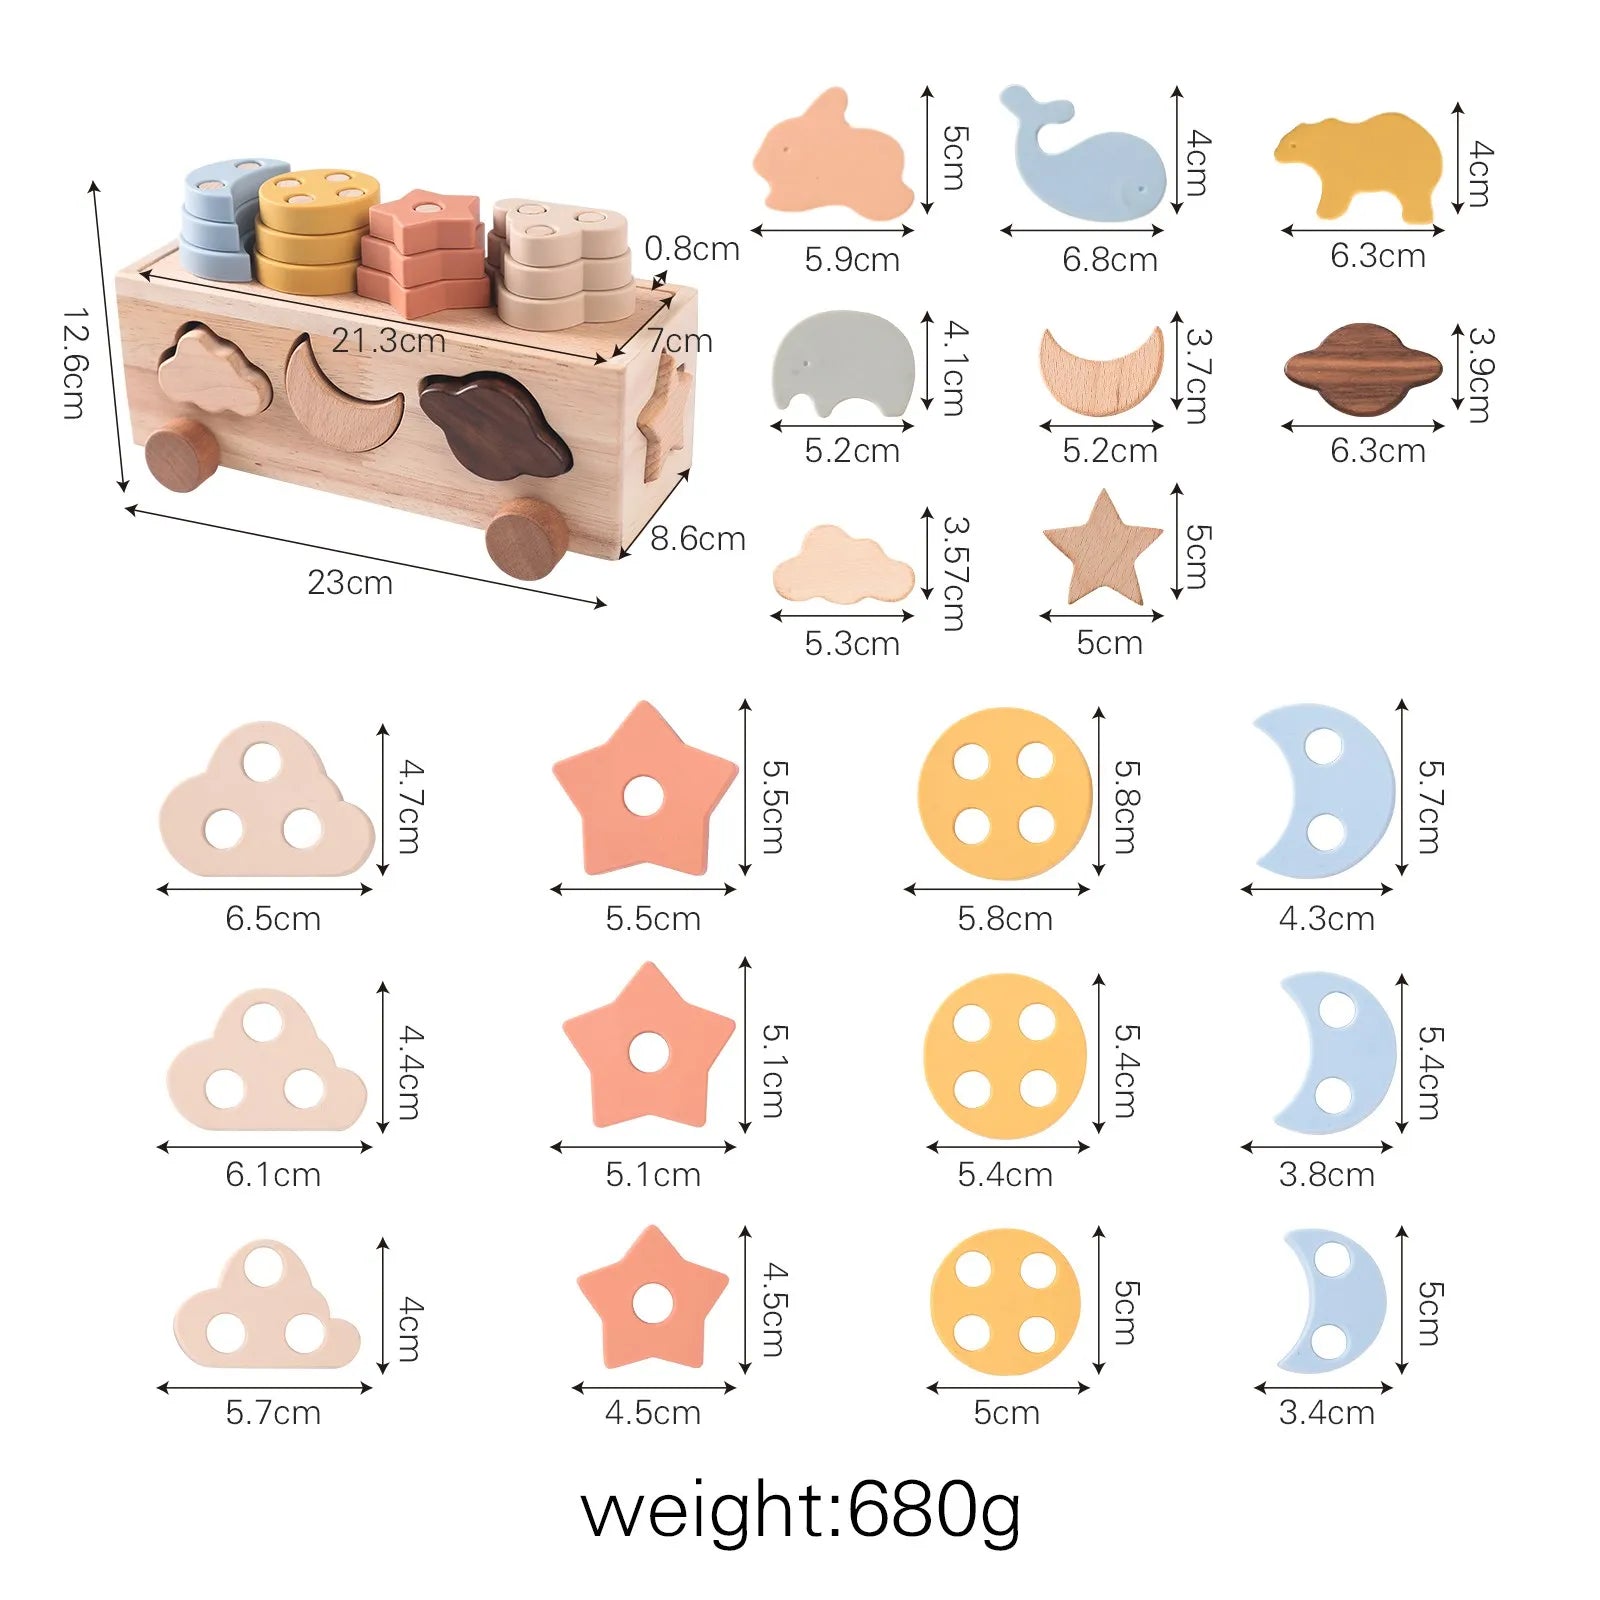 this image shows each individual piece and the sizes of them all. They range from 4-6 cm in size and the cart is 12.6cm x 23cm x 8.6cm 